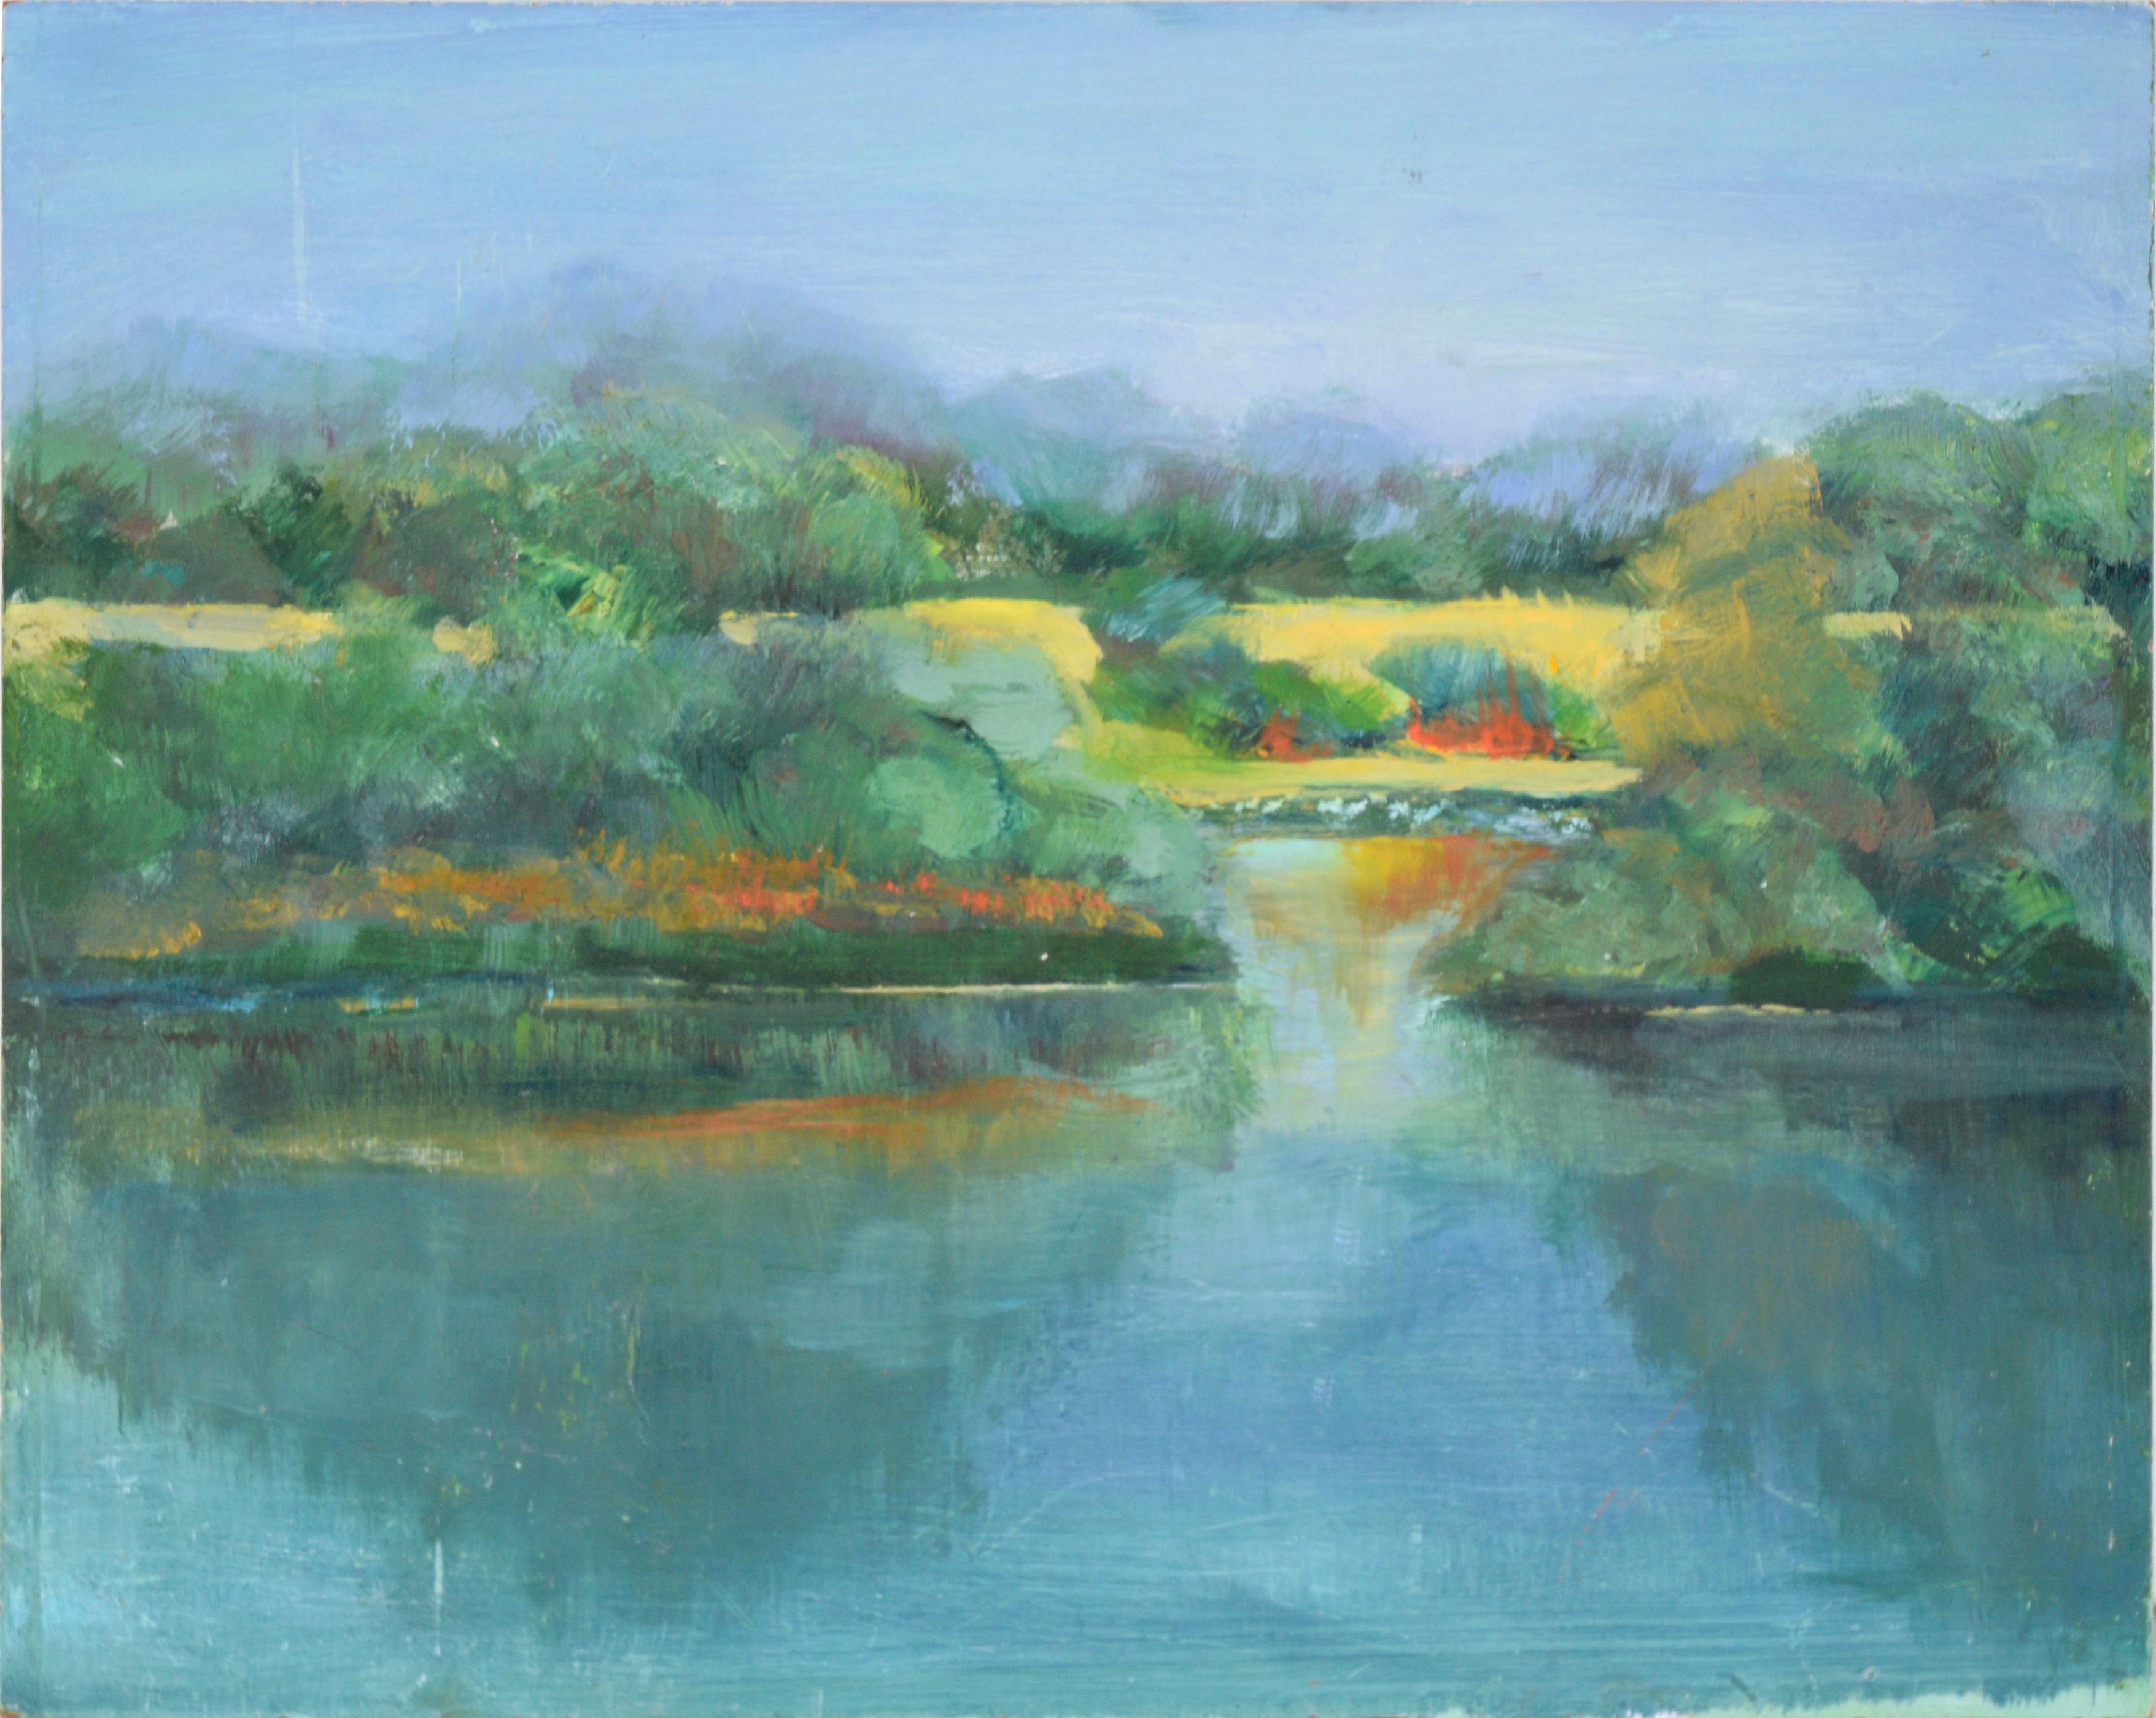 Nick White Landscape Painting - "Coyote Park" - Plein Aire Landscape in Oil on Board